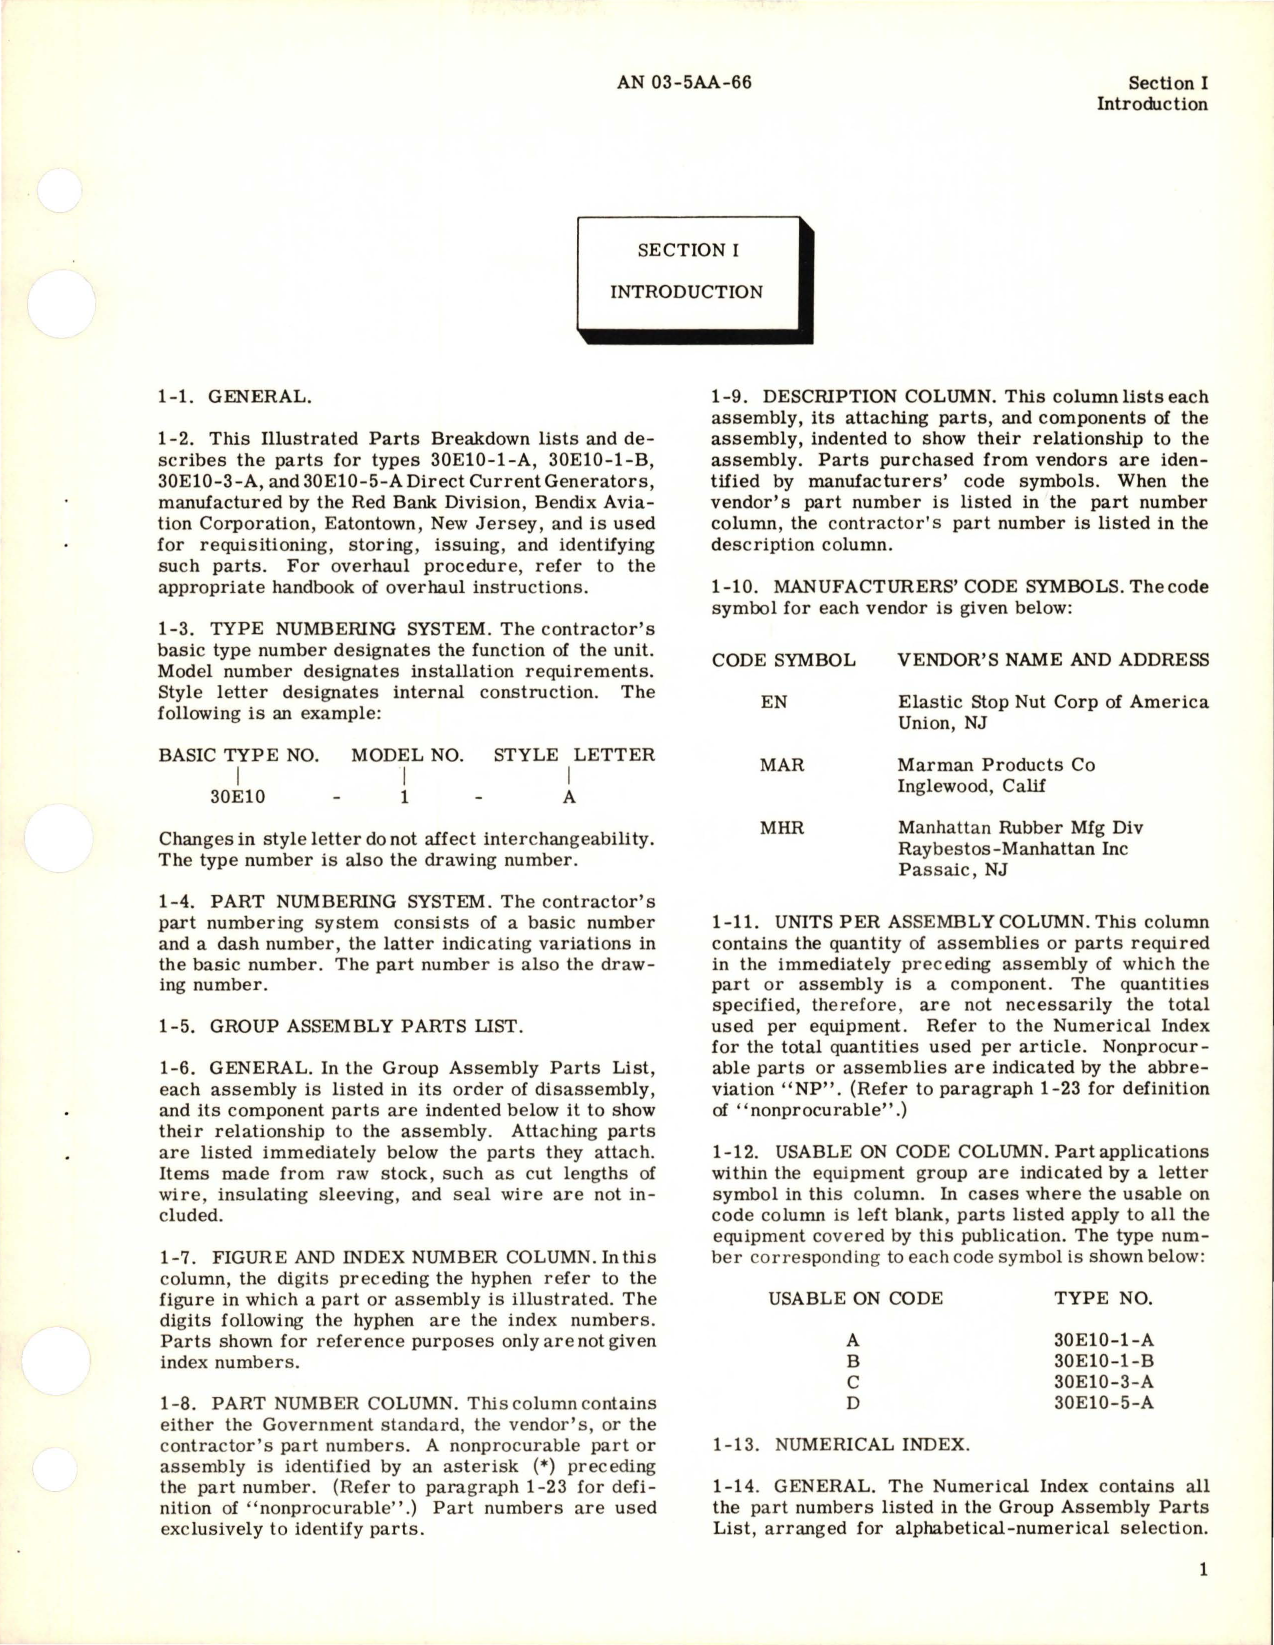 Sample page 5 from AirCorps Library document: Illustrated Parts Breakdown for Direct Current Generator - Types 30E10-1-A, 30E10-1-B, 30E10-3-A, and 30E10-5-A